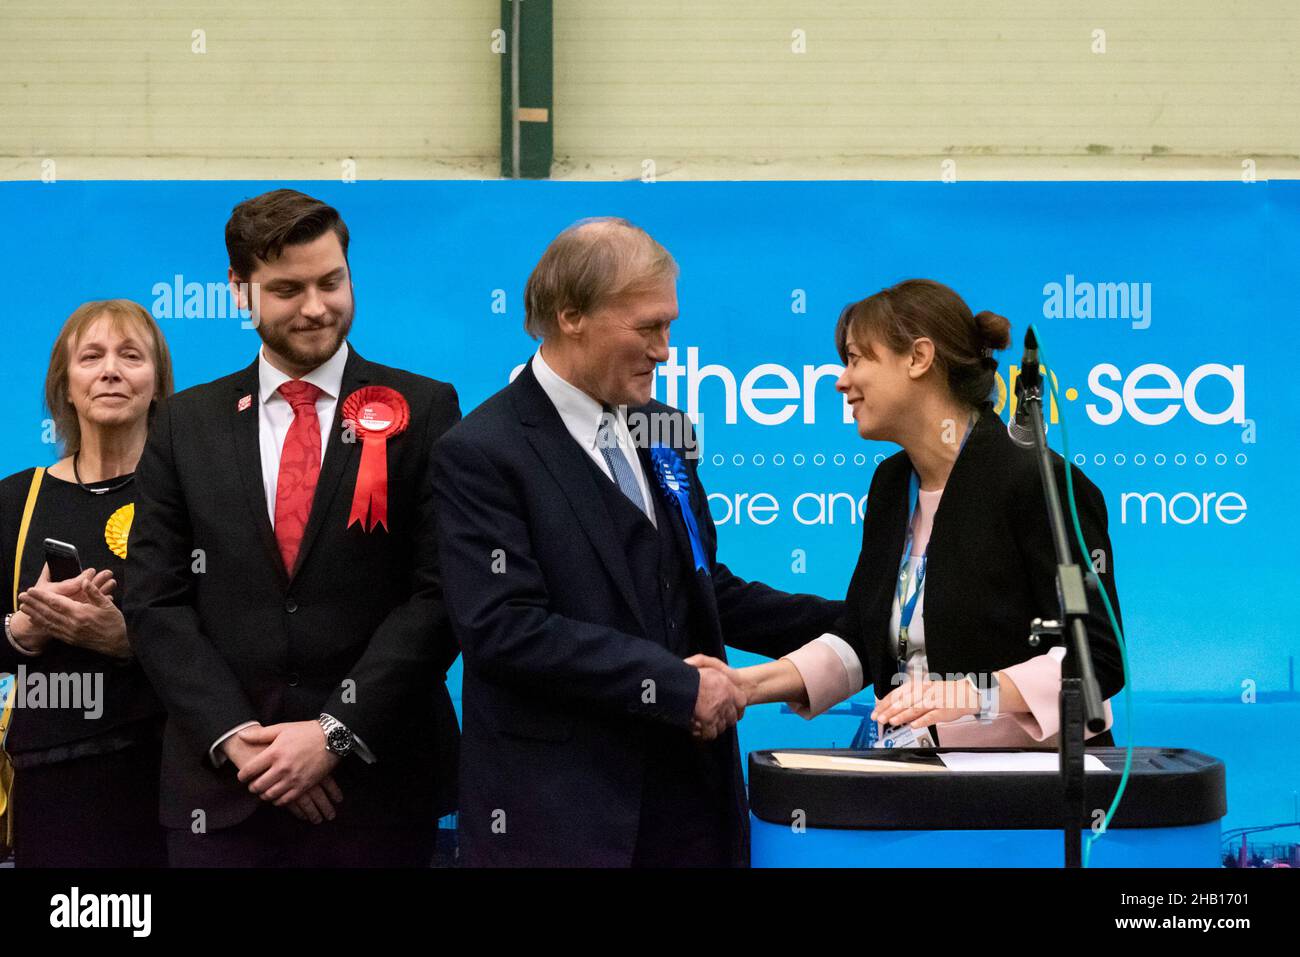 MP David Amess at the UK General Election, winning the Southend West constituency, being congratulated by the returning officer, with party candidates Stock Photo